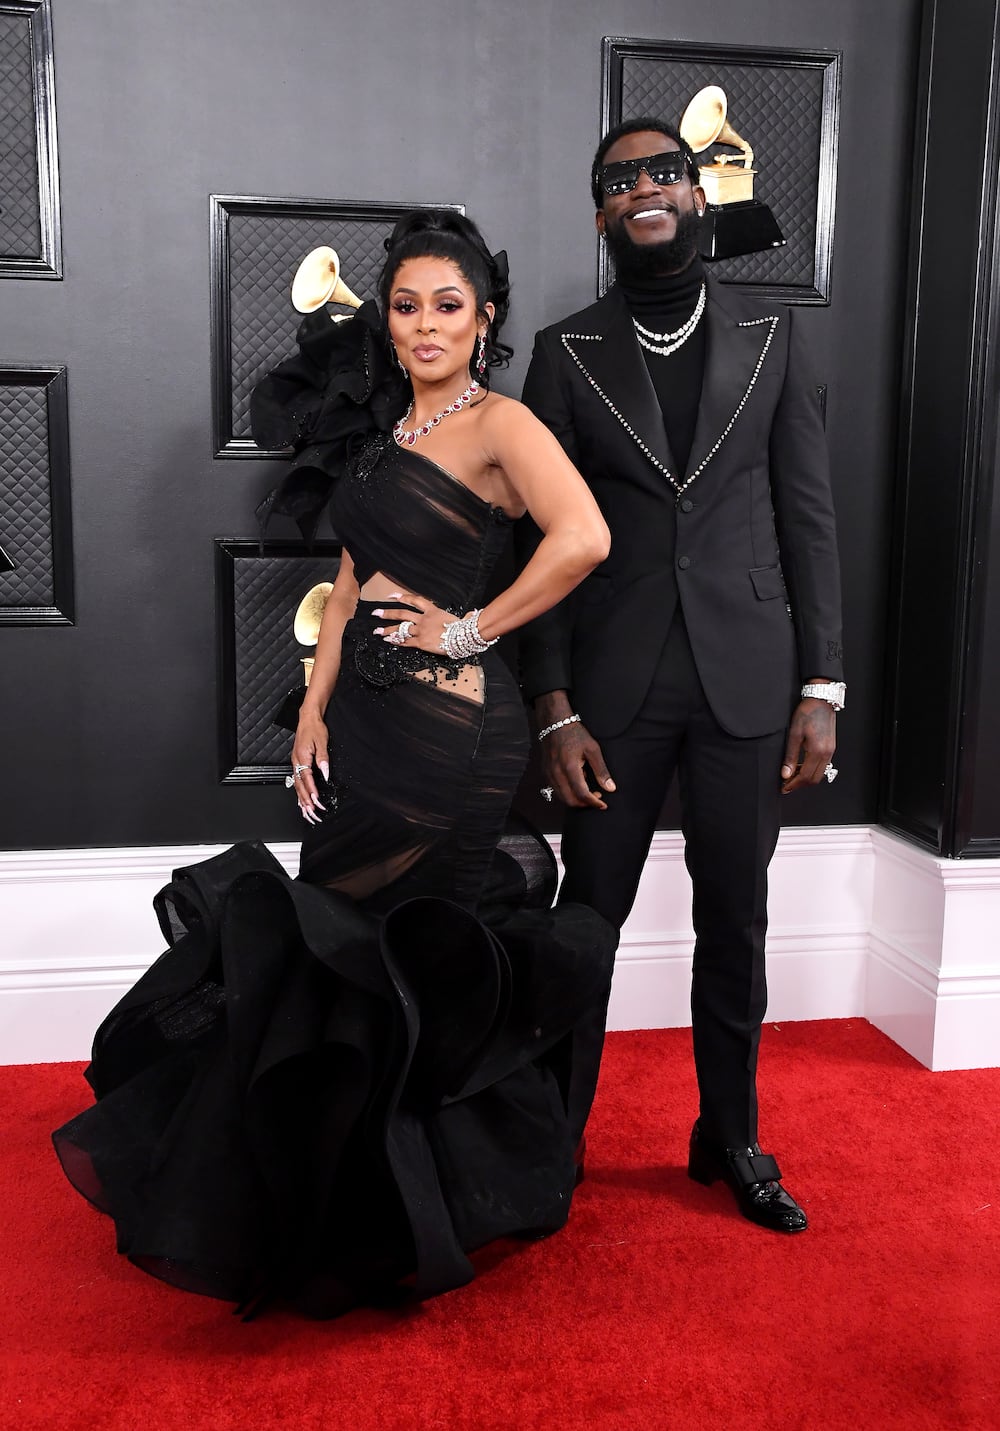 Gucci Mane, 42, and Wife, Keyshia, 37, Expecting Their 2nd Child